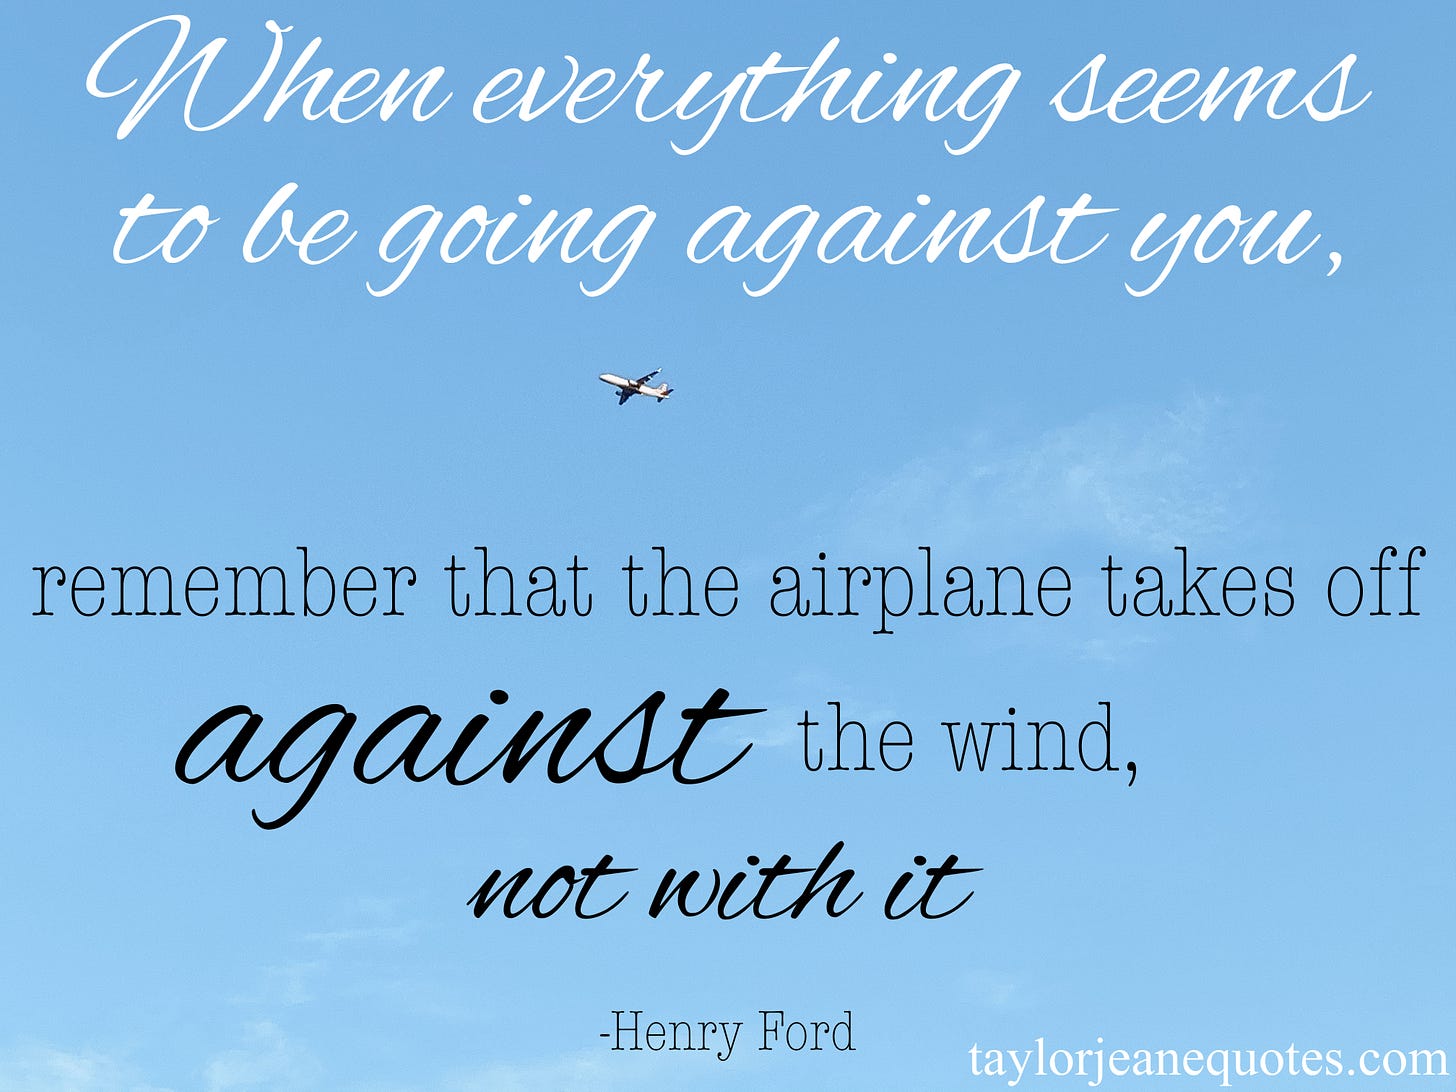 airplane quotes, take off quotes, taylor jeane quotes, uplifting quotes, motivational quotes, inspirational quotes, life quotes, henry ford quotes